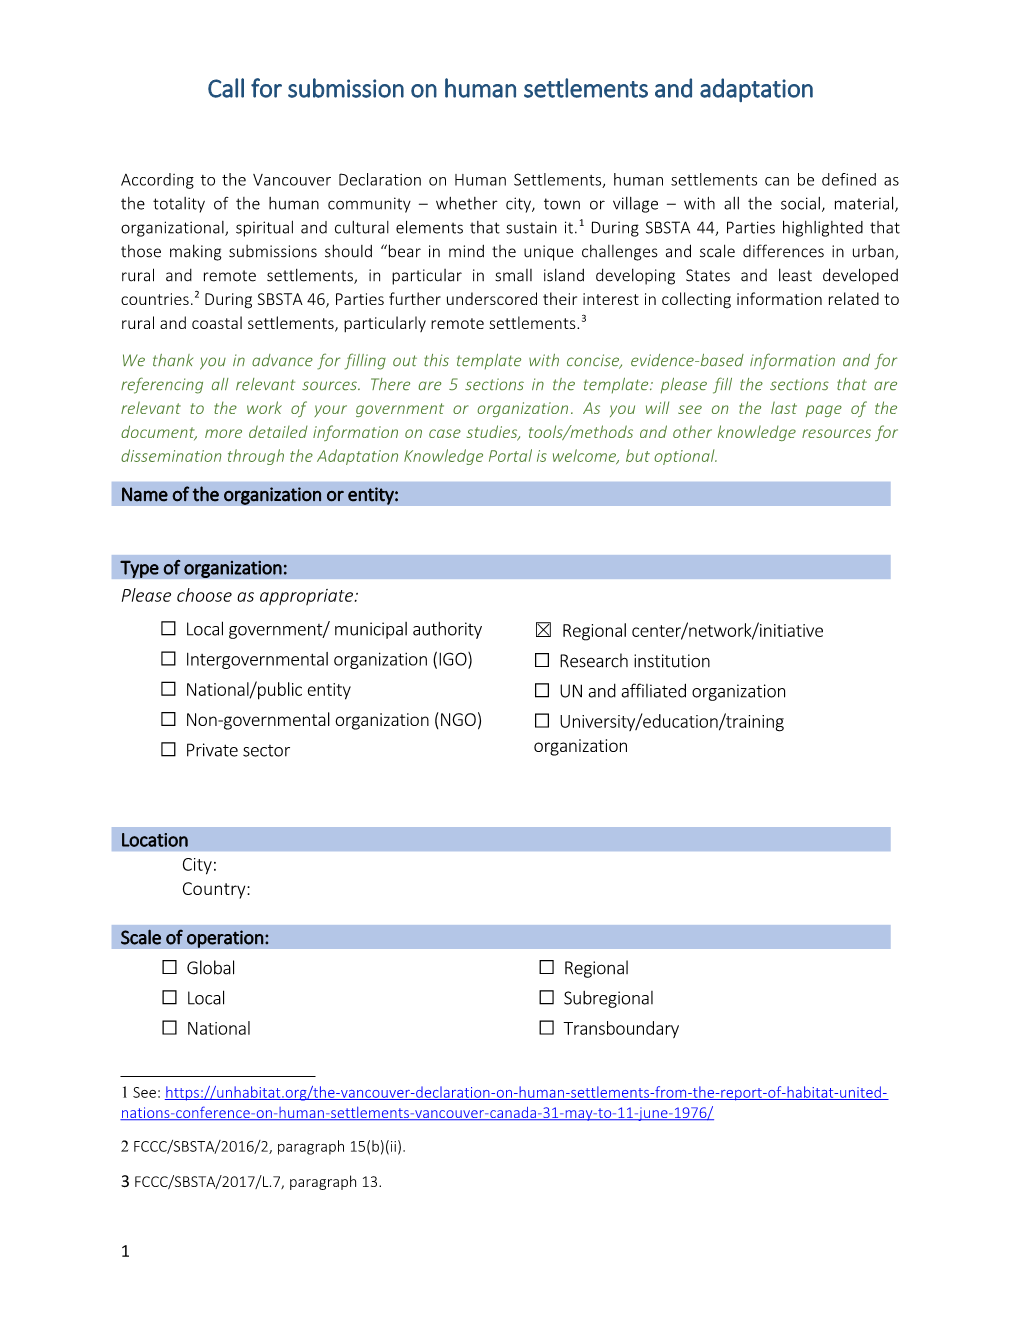 Call for Submission on Human Settlements and Adaptation